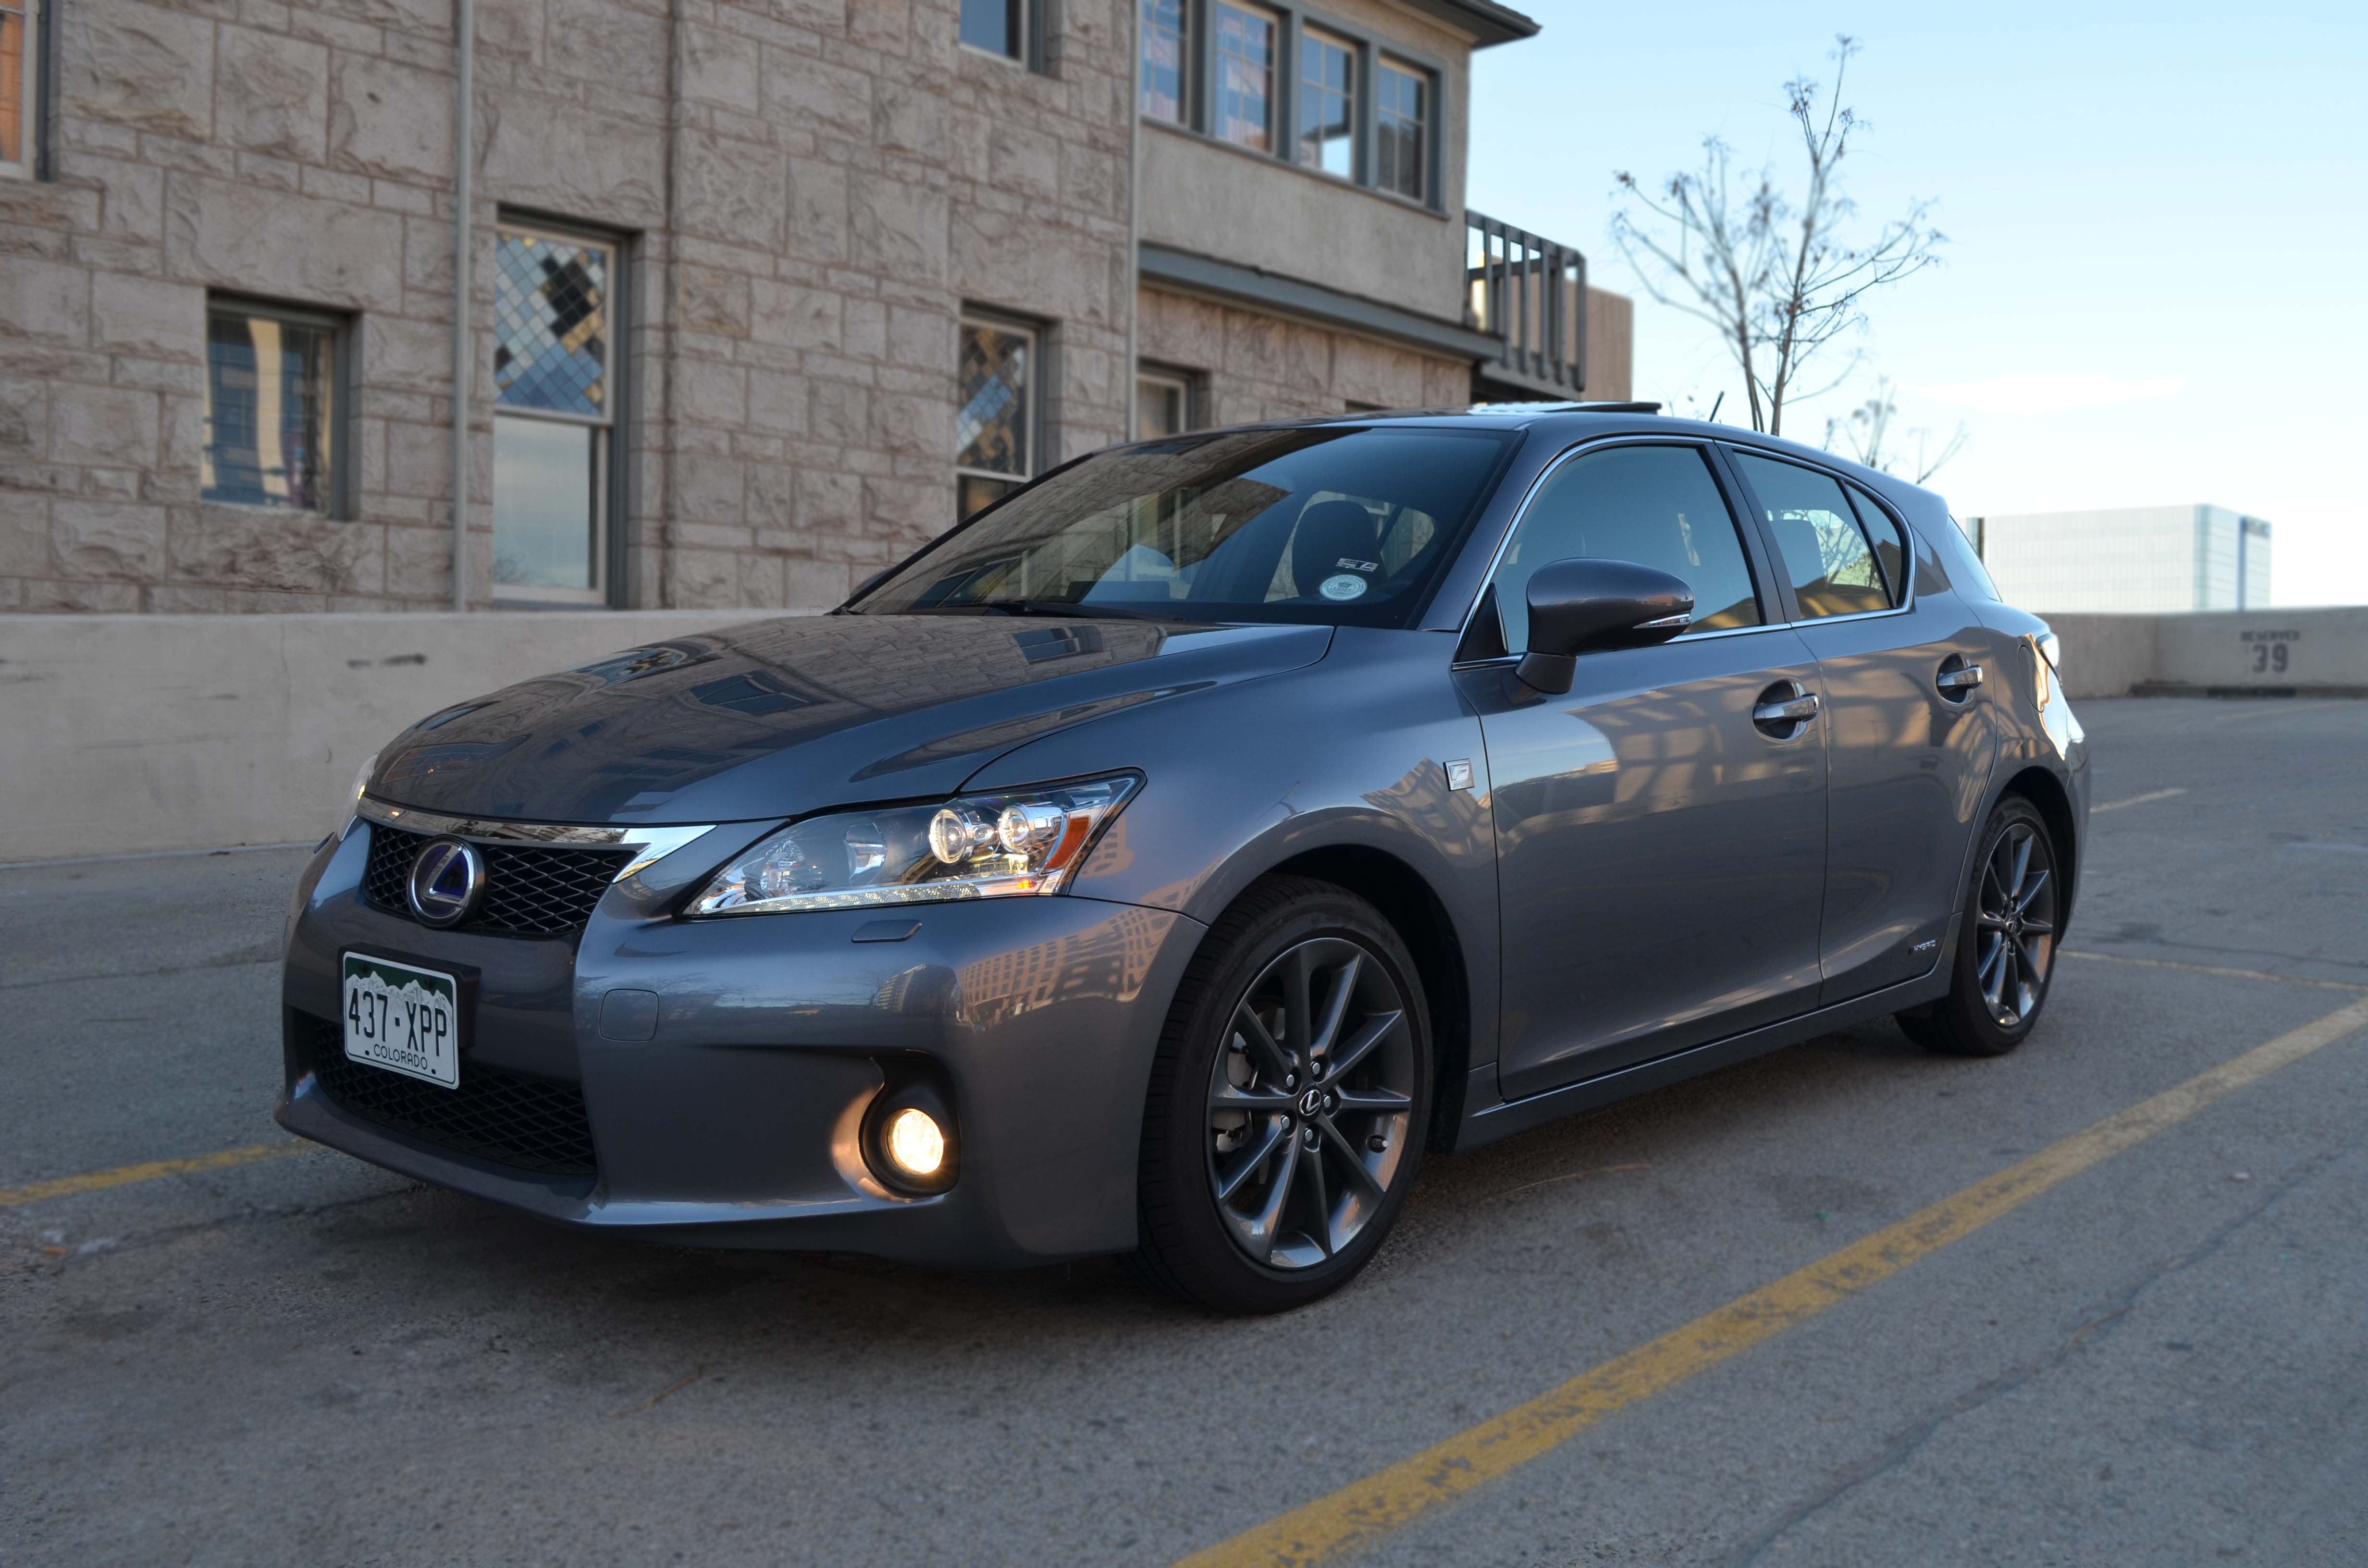 The 2012 Lexus Ct 200h Is 3 206 Pounds Of Hybrid Sexiness